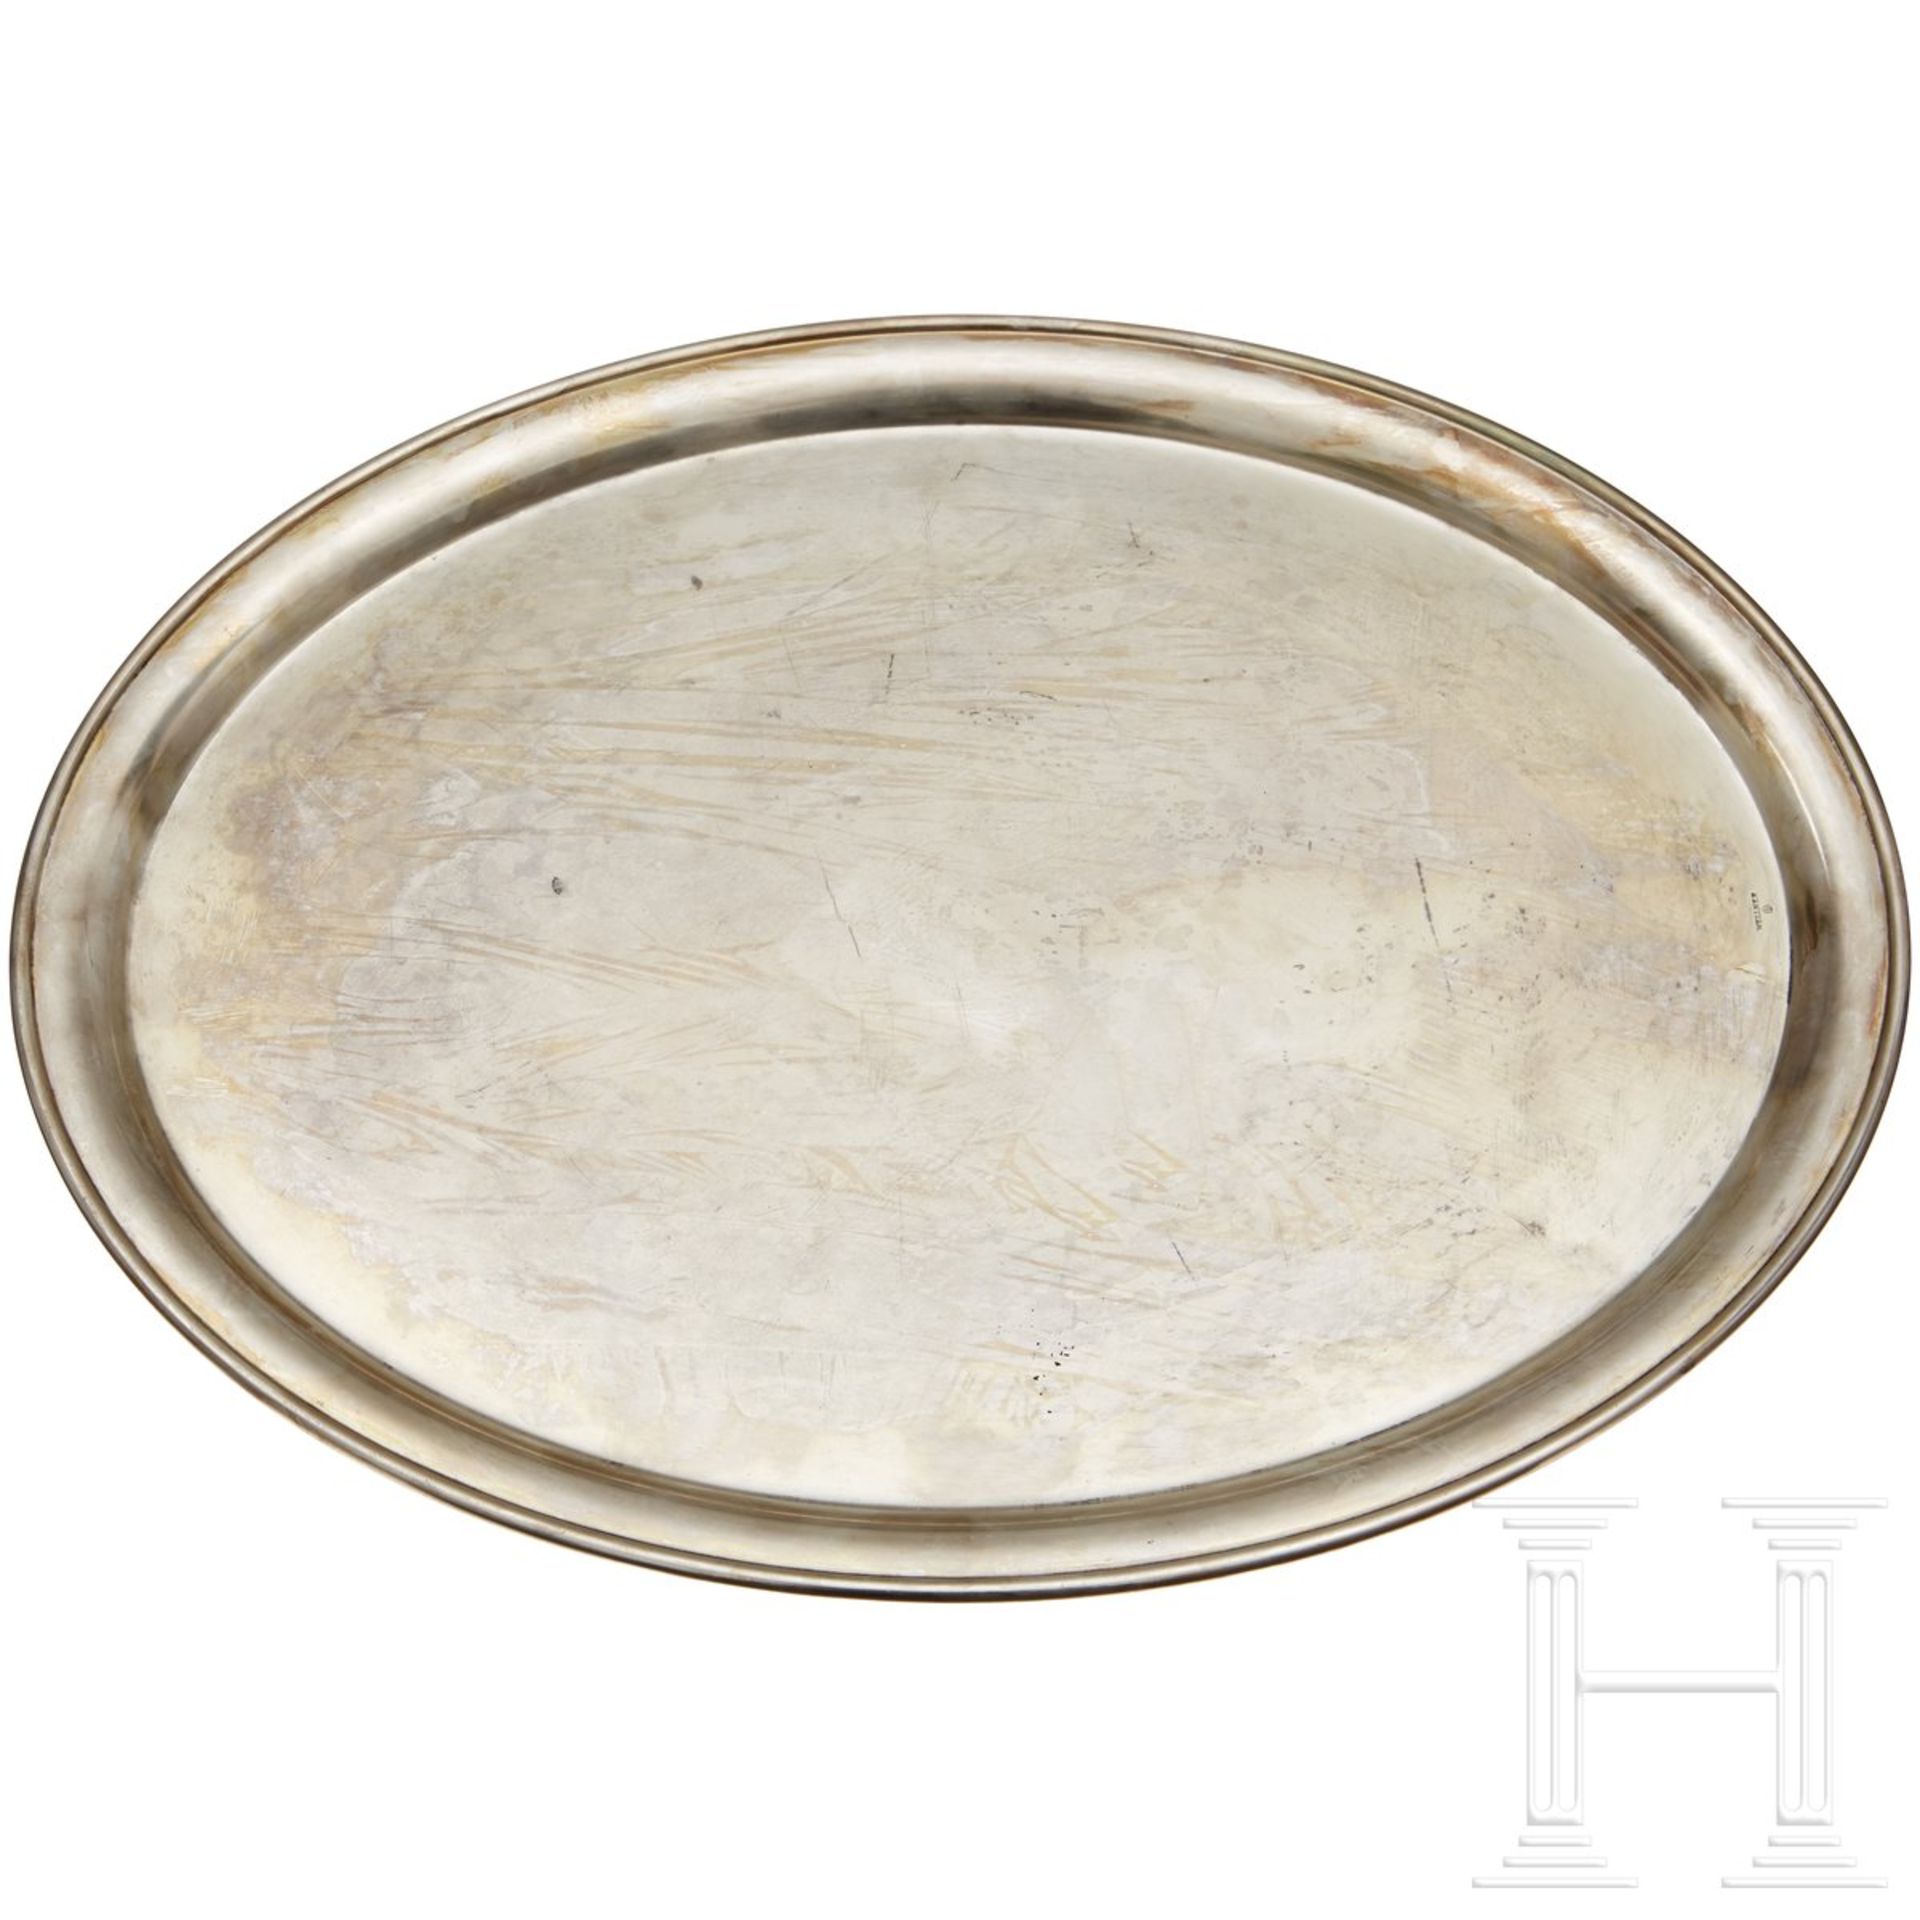 An oval Serving Platter from a Silver Service